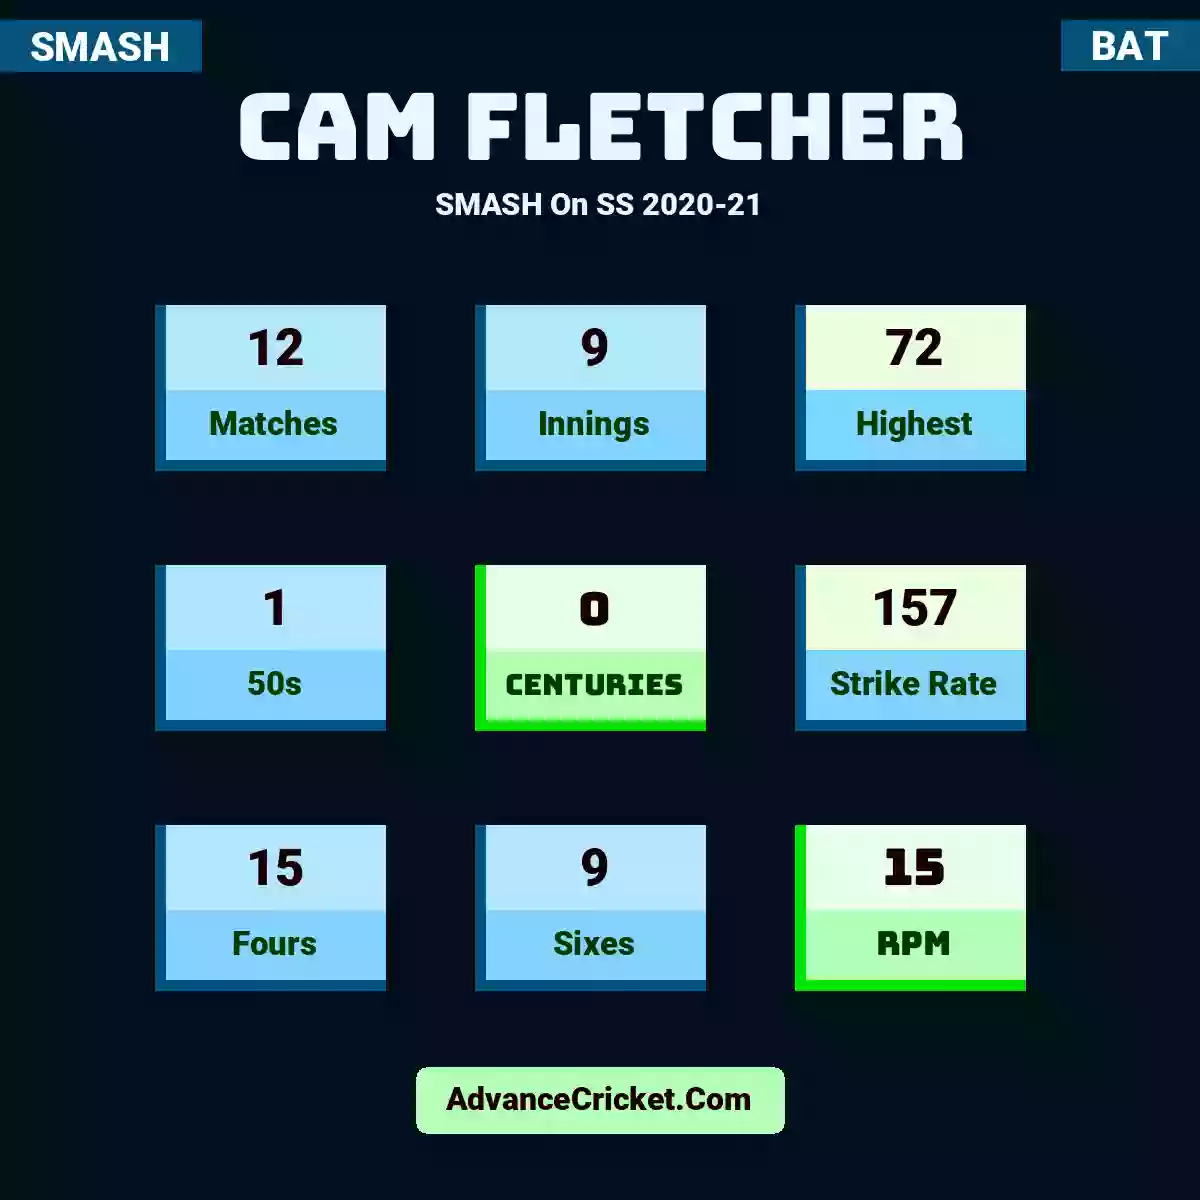 Cam Fletcher SMASH  On SS 2020-21, Cam Fletcher played 12 matches, scored 72 runs as highest, 1 half-centuries, and 0 centuries, with a strike rate of 157. C.Fletcher hit 15 fours and 9 sixes, with an RPM of 15.